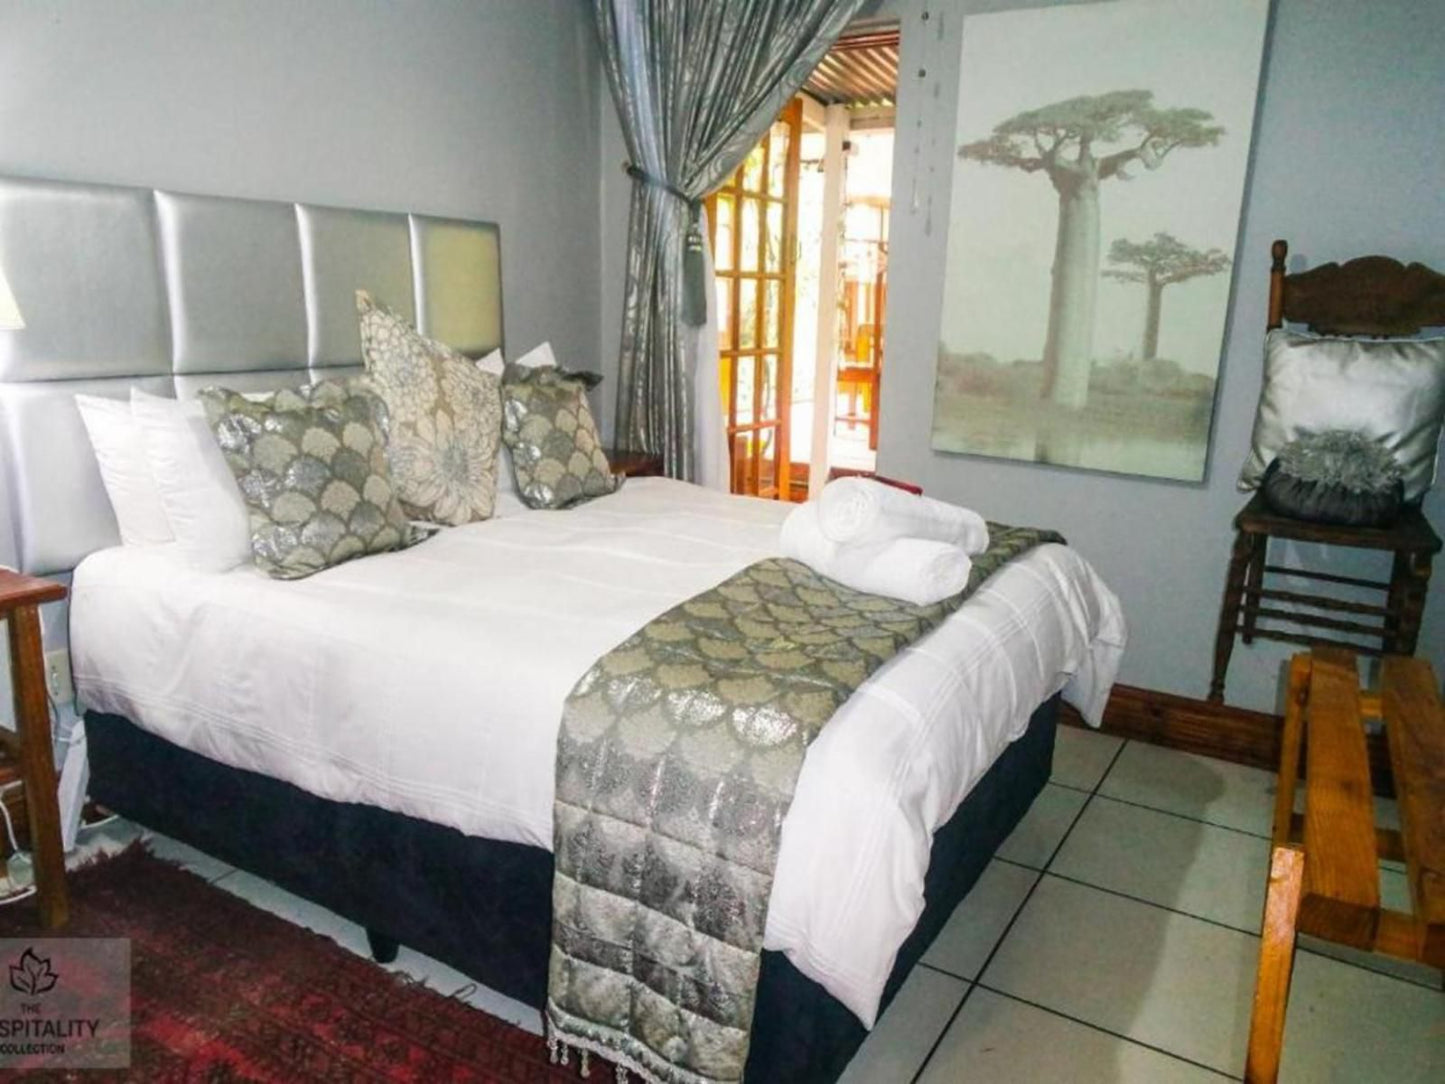 Snooze A Lot Guest House Secunda Mpumalanga South Africa Bedroom